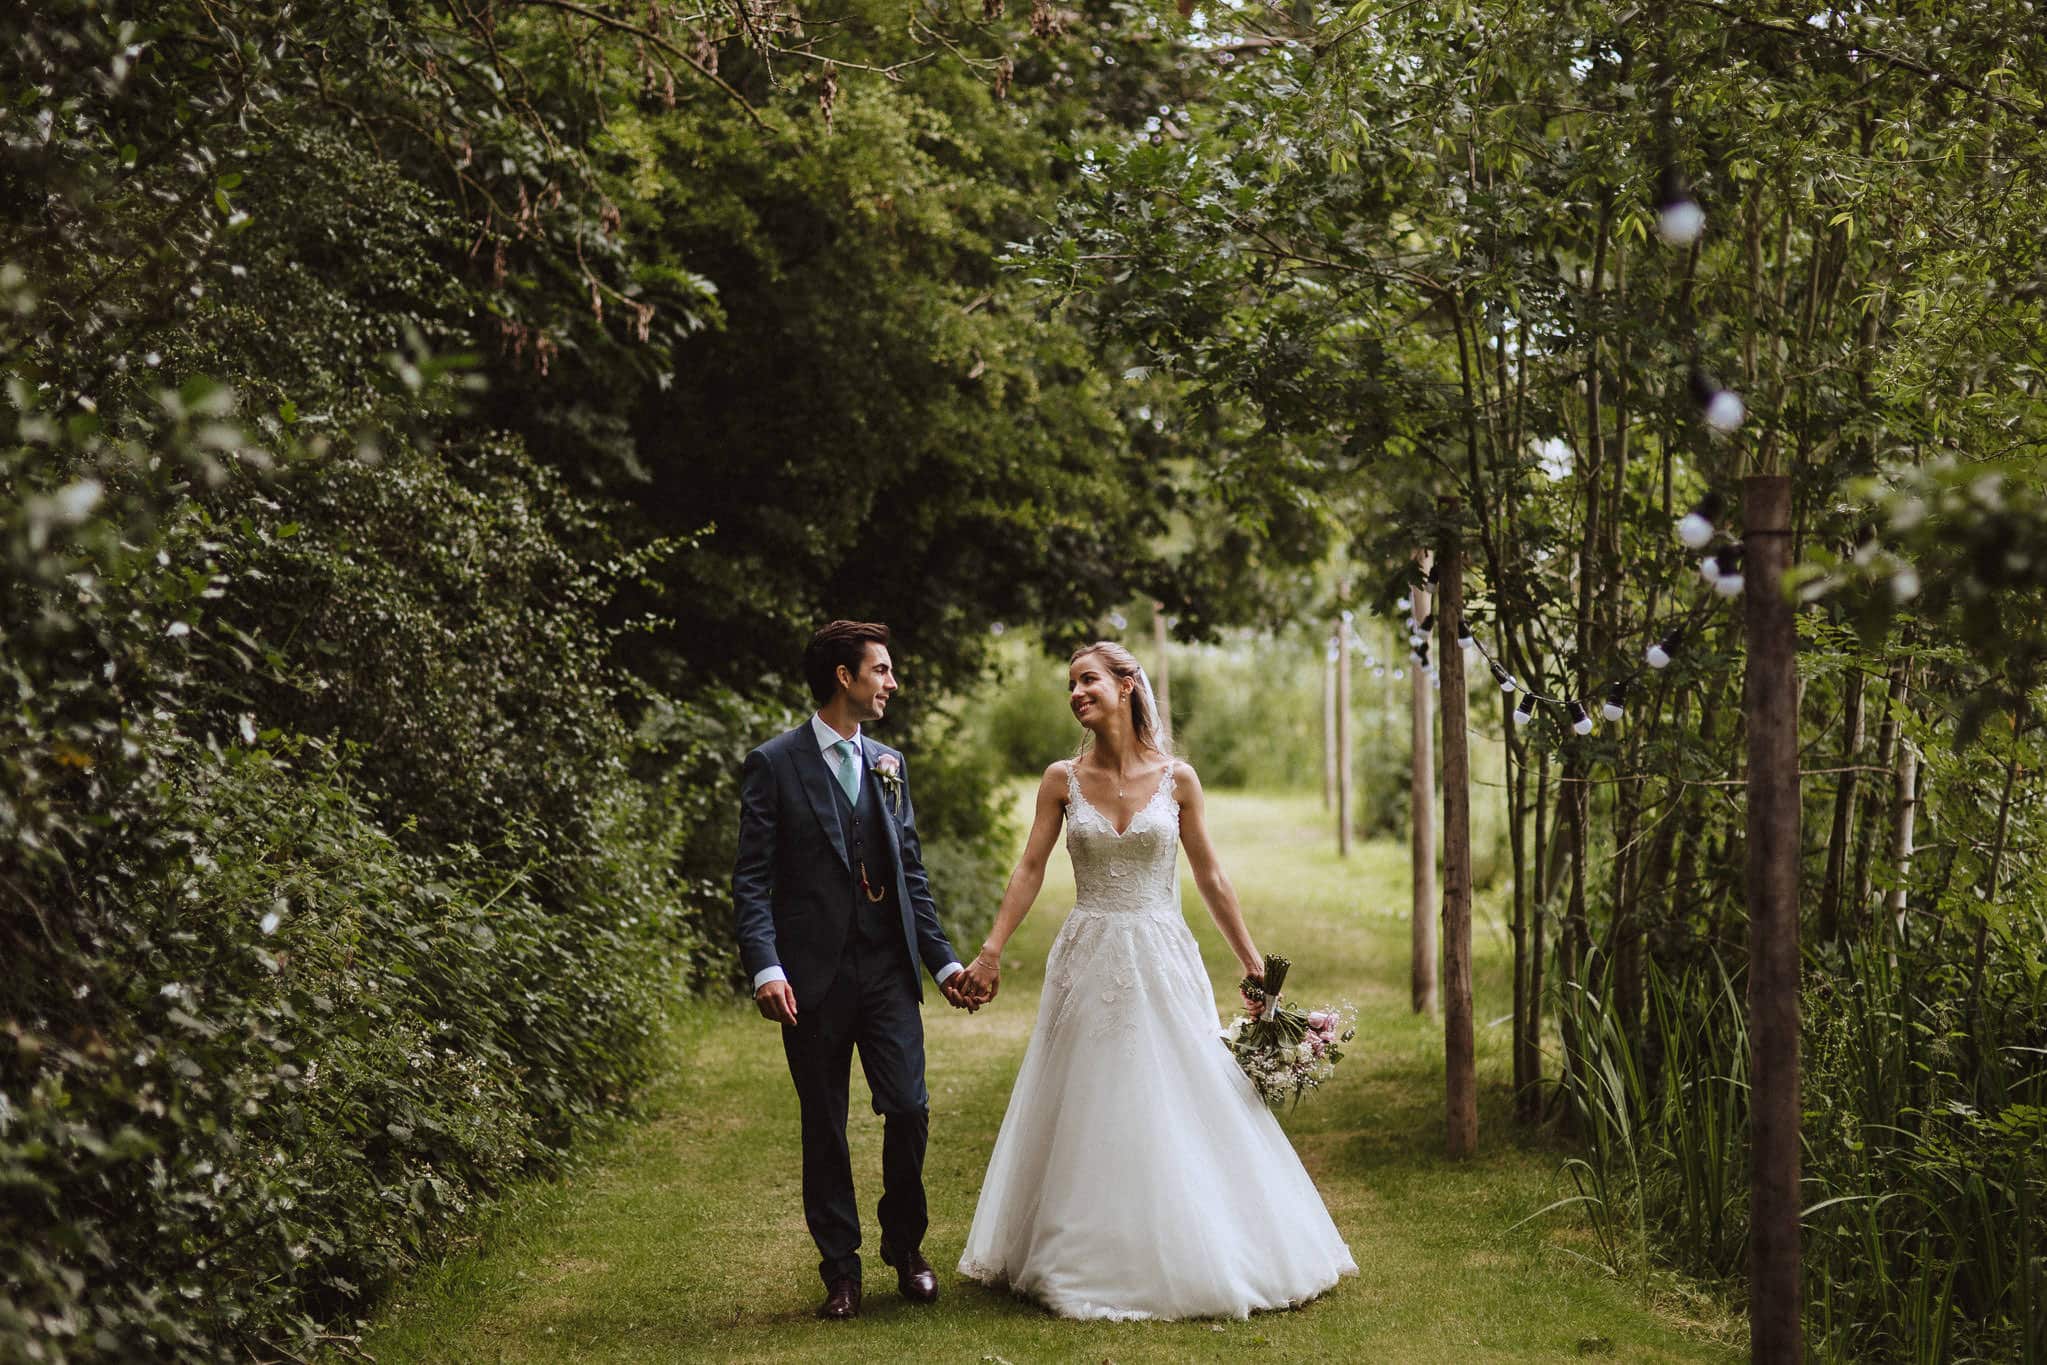 Leicestershire wedding at bride's home